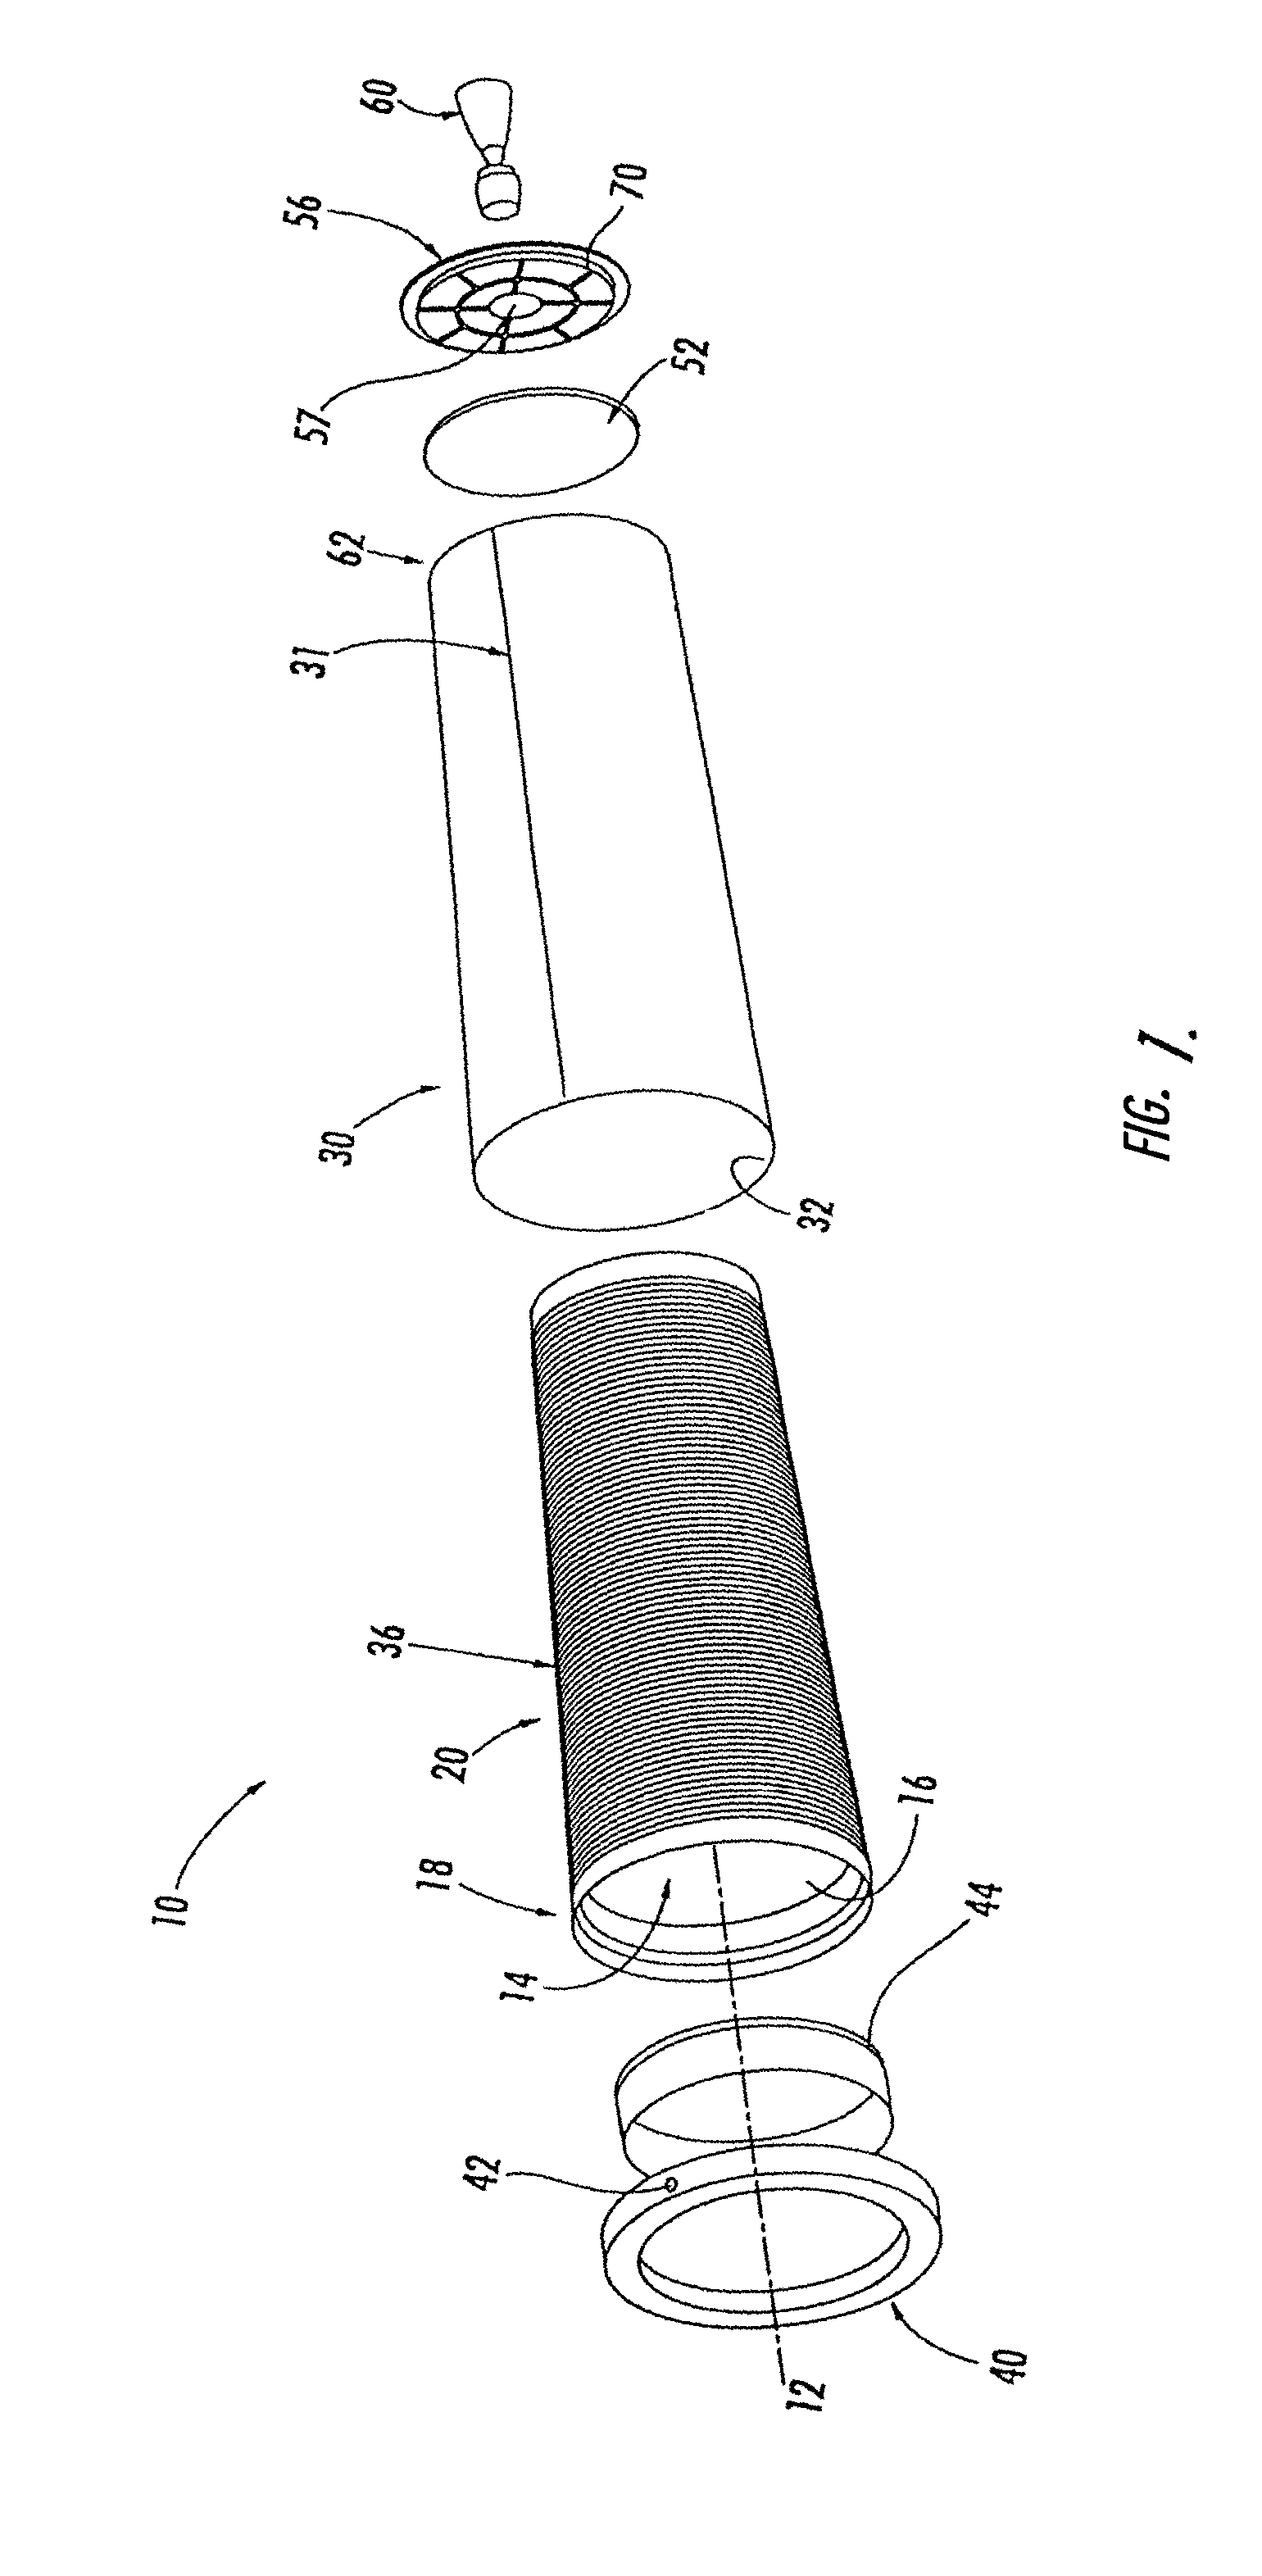 Thruster device responsive to solar radiation and associated methods